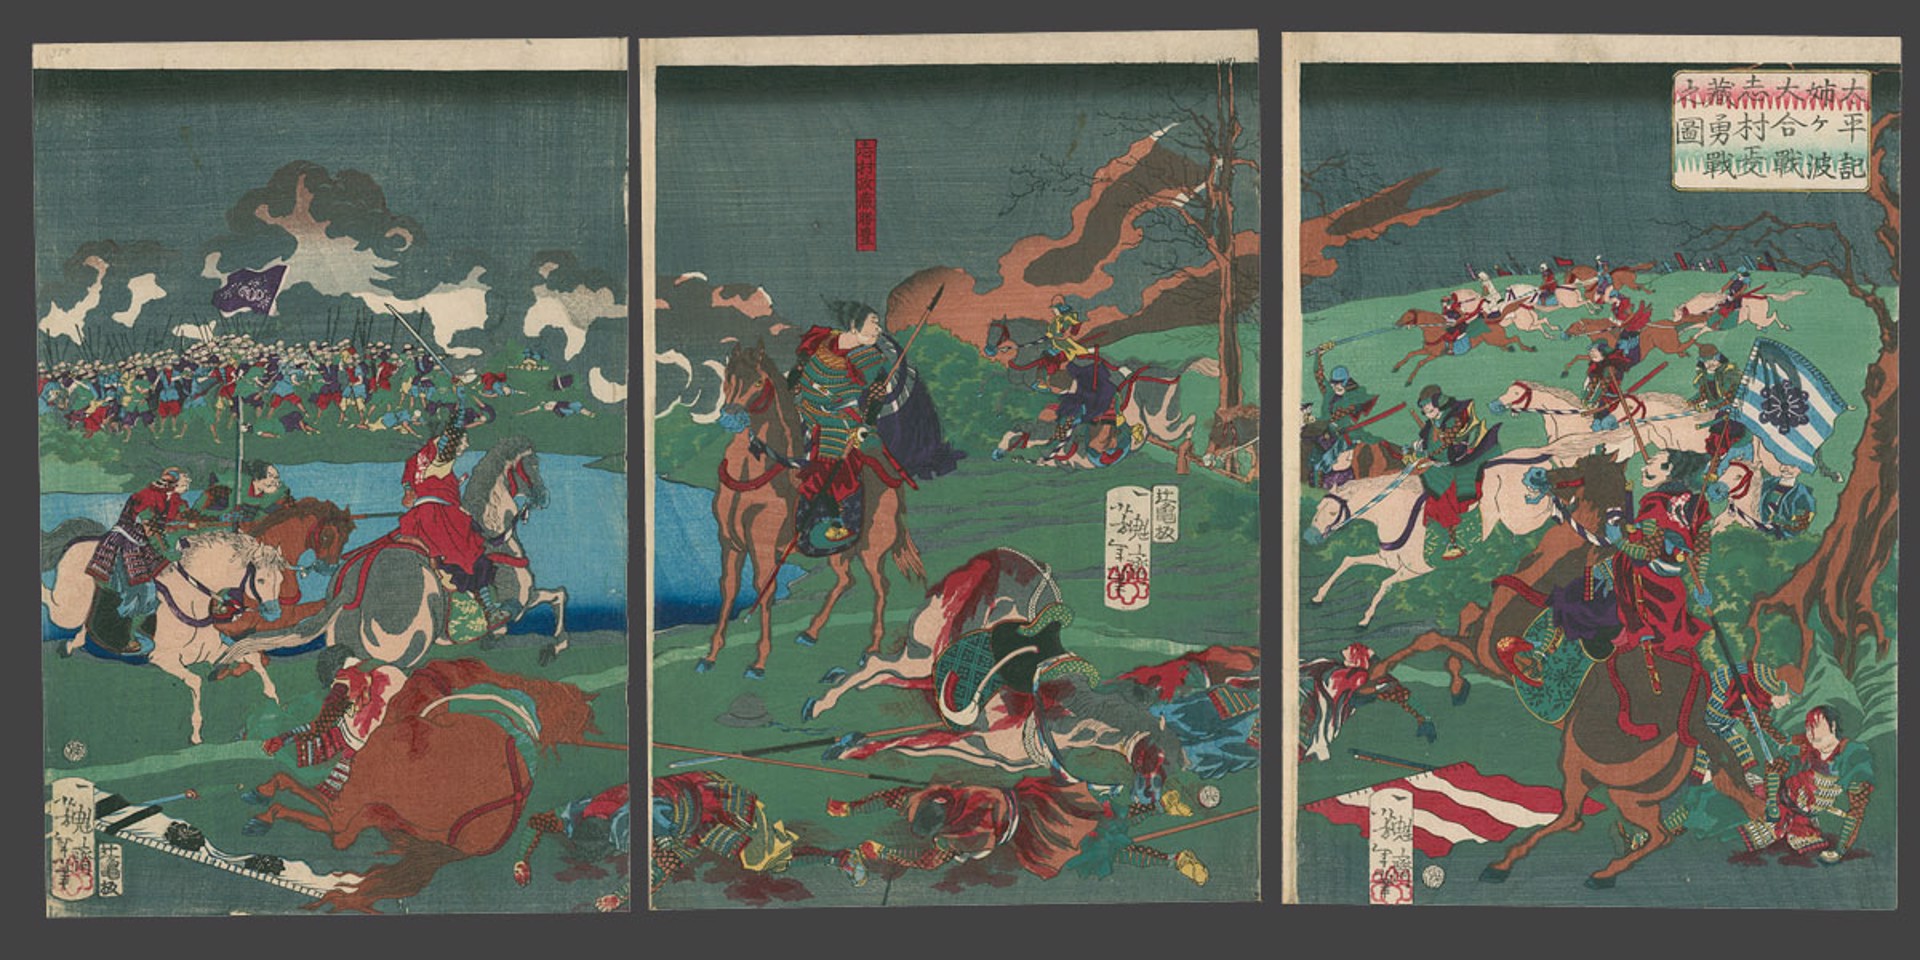 From the Taiheiki: The Brave Fight of Shimura Seizoat the Great Battle of Aneganami by Yoshitoshi